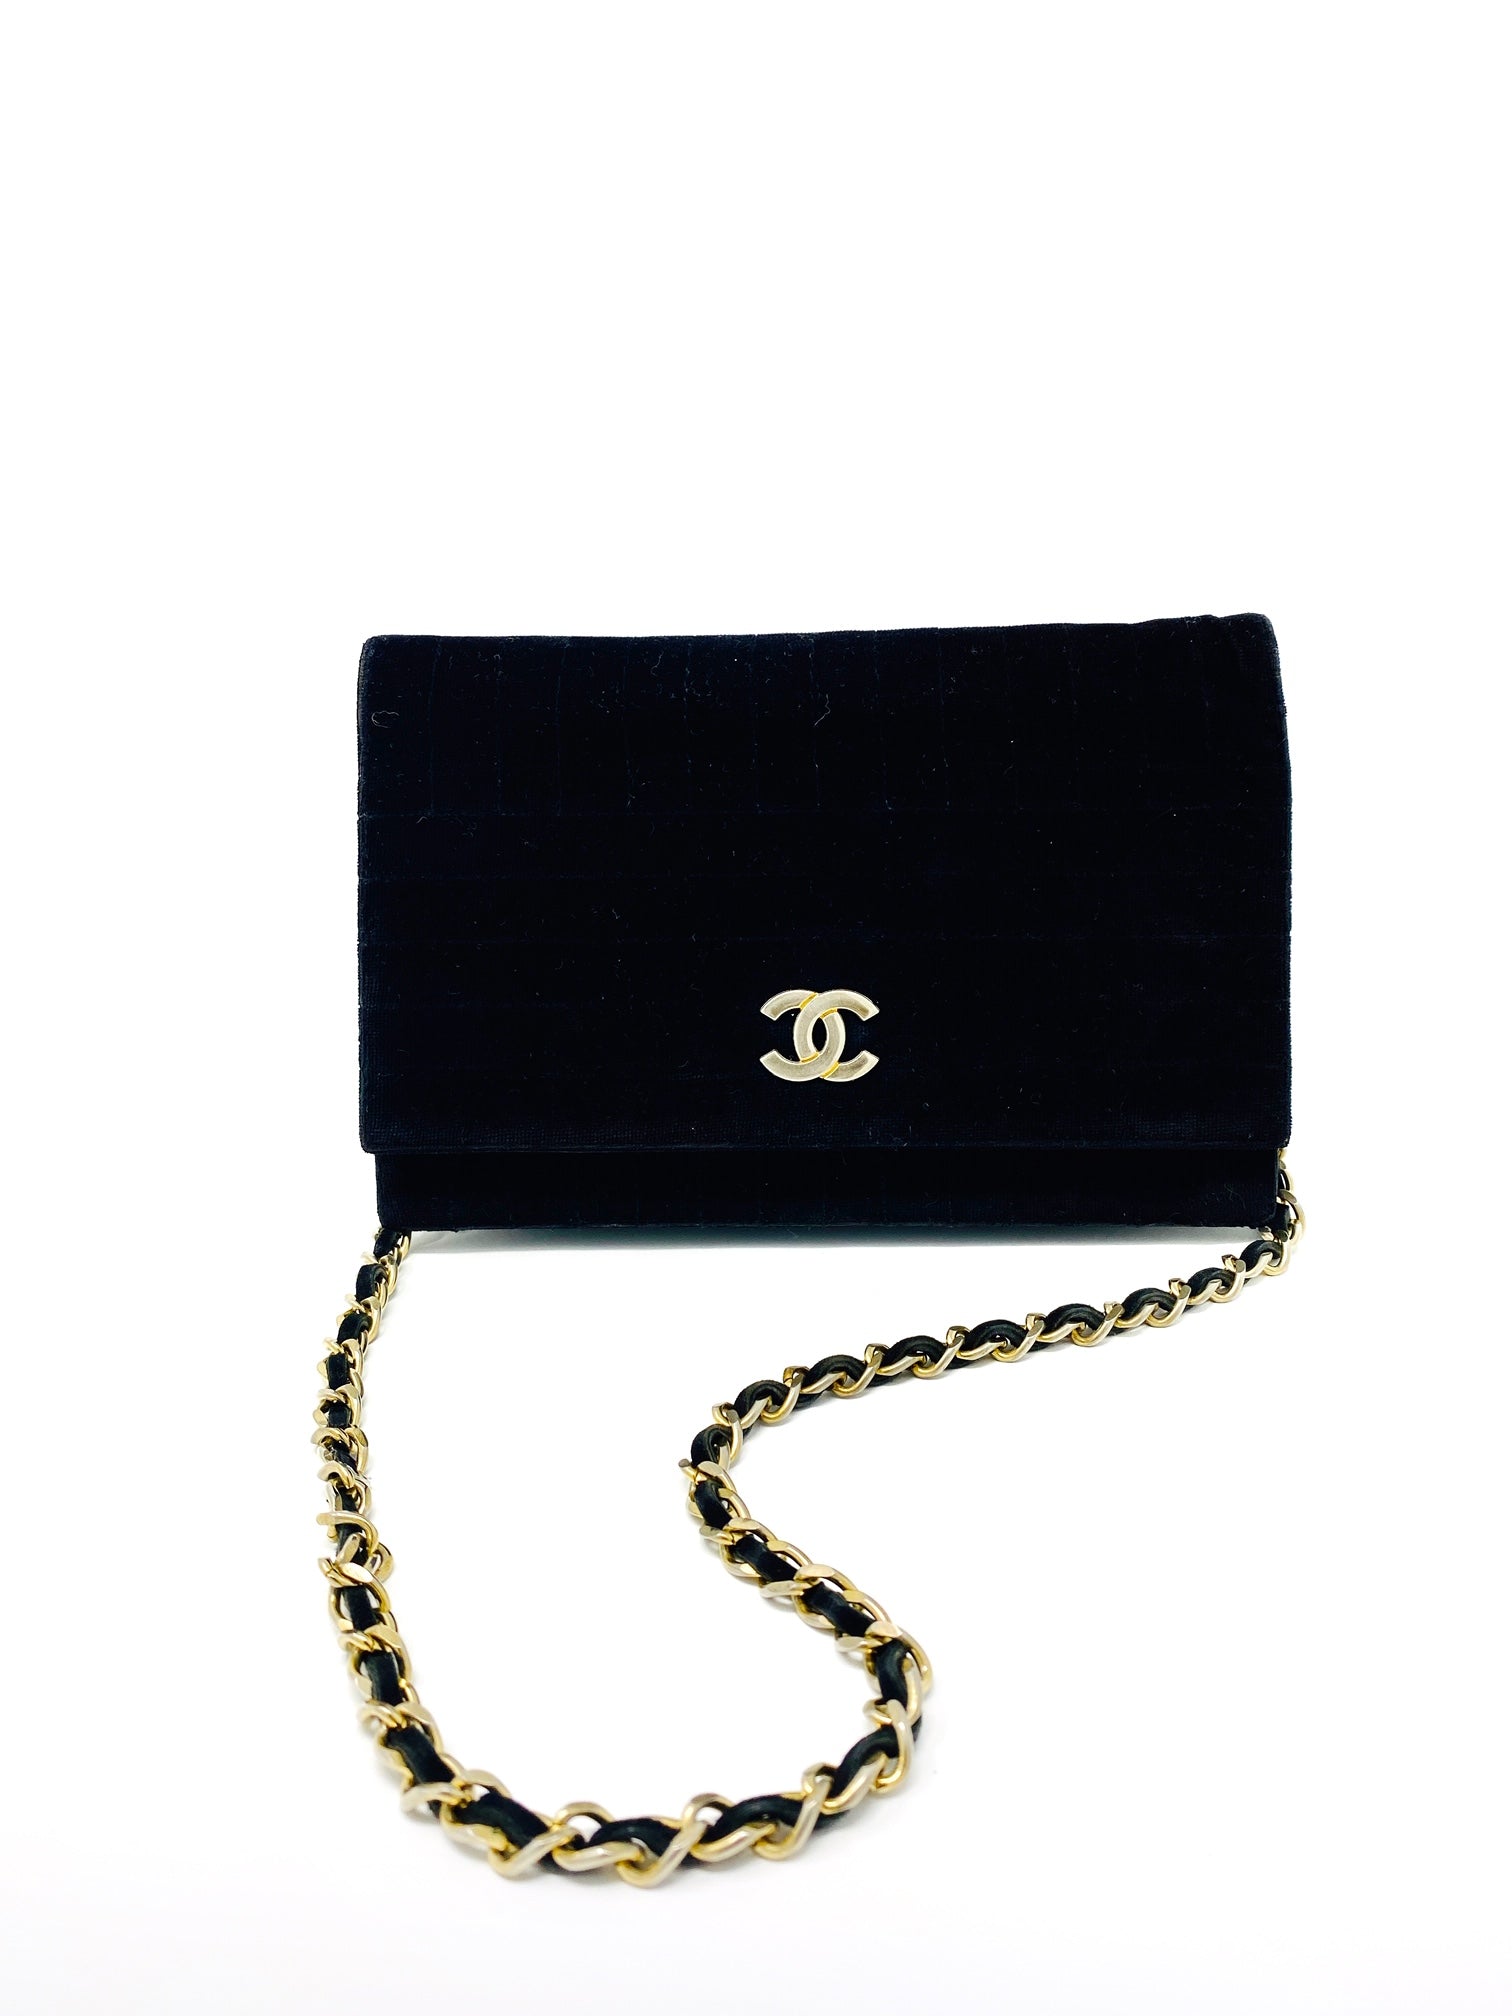 chanel bag second hand